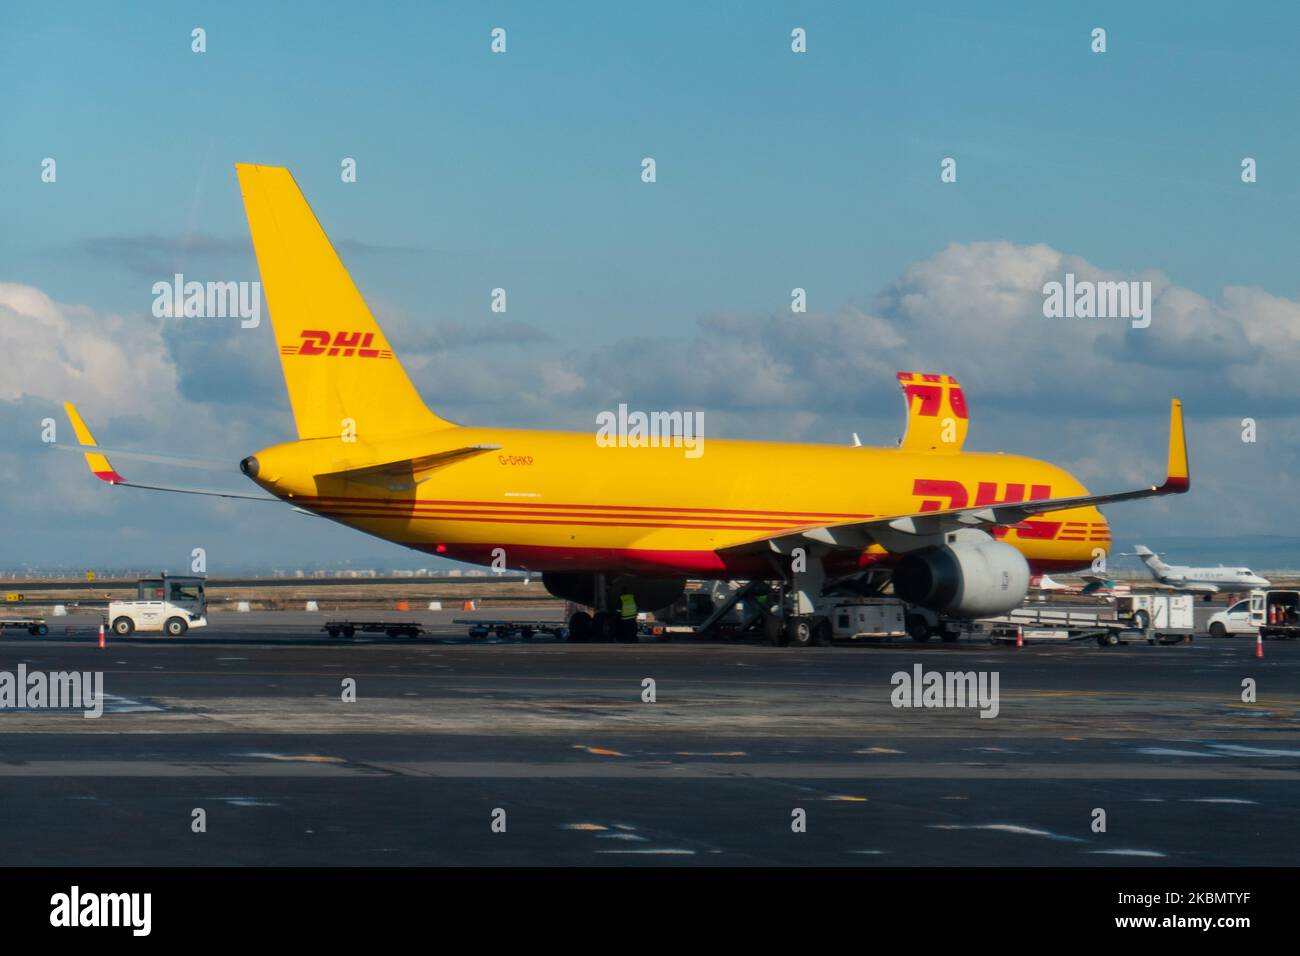 DHL Air Boeing 757 Cargo airplane as seen during the day with the cargo door open at Thessaloniki International Airport Makedonia SKG LGTS in Greece. The Boeing B757 or 757-200F freight aircraft has the registration G-DHKP and is powered by 2x Roll Royce RR jet engines. DHL Aviation is a division of DHL Express owned by Deutsche Post and is an Express Logistics air freight carrier. During the Covid-19 Coronavirus pandemic, most of the passenger airlines grounded their fleet but the cargo airlines increased the flights to transport goods and supplies. March 16, 2020 (Photo by Nicolas Economou/N Stock Photo